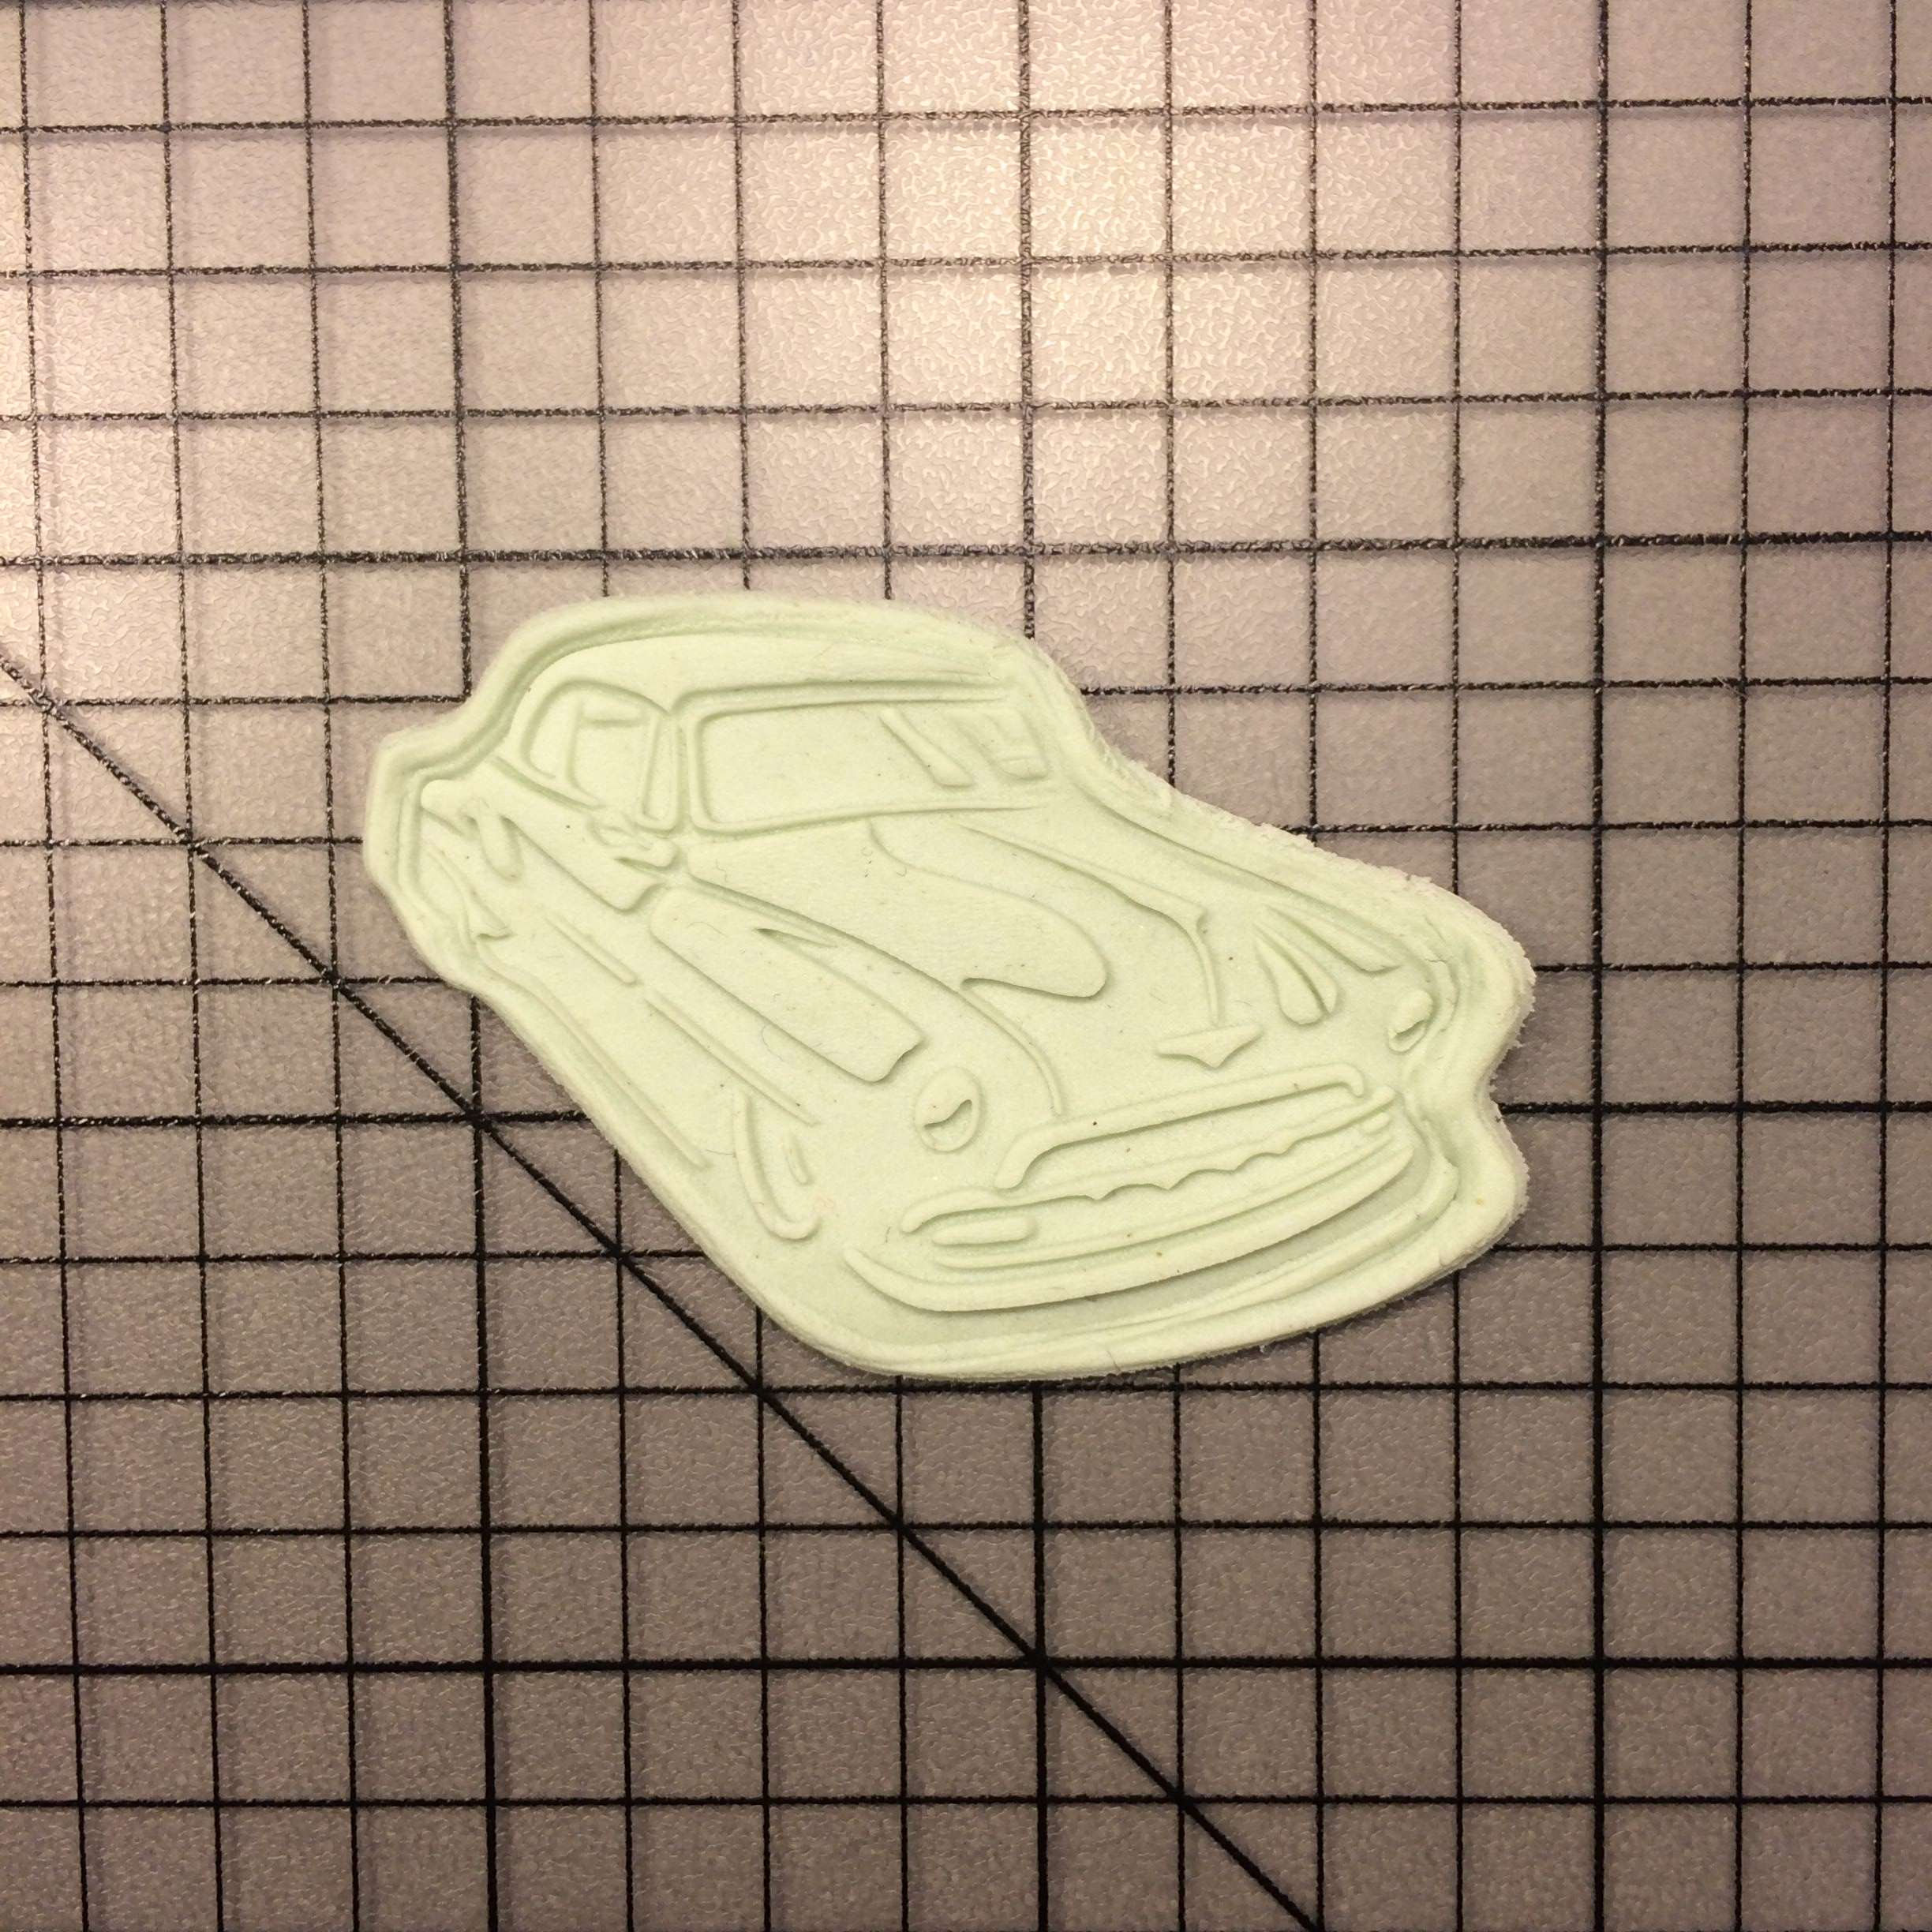 Car 101 Cookie Cutter and Acrylic Stamp